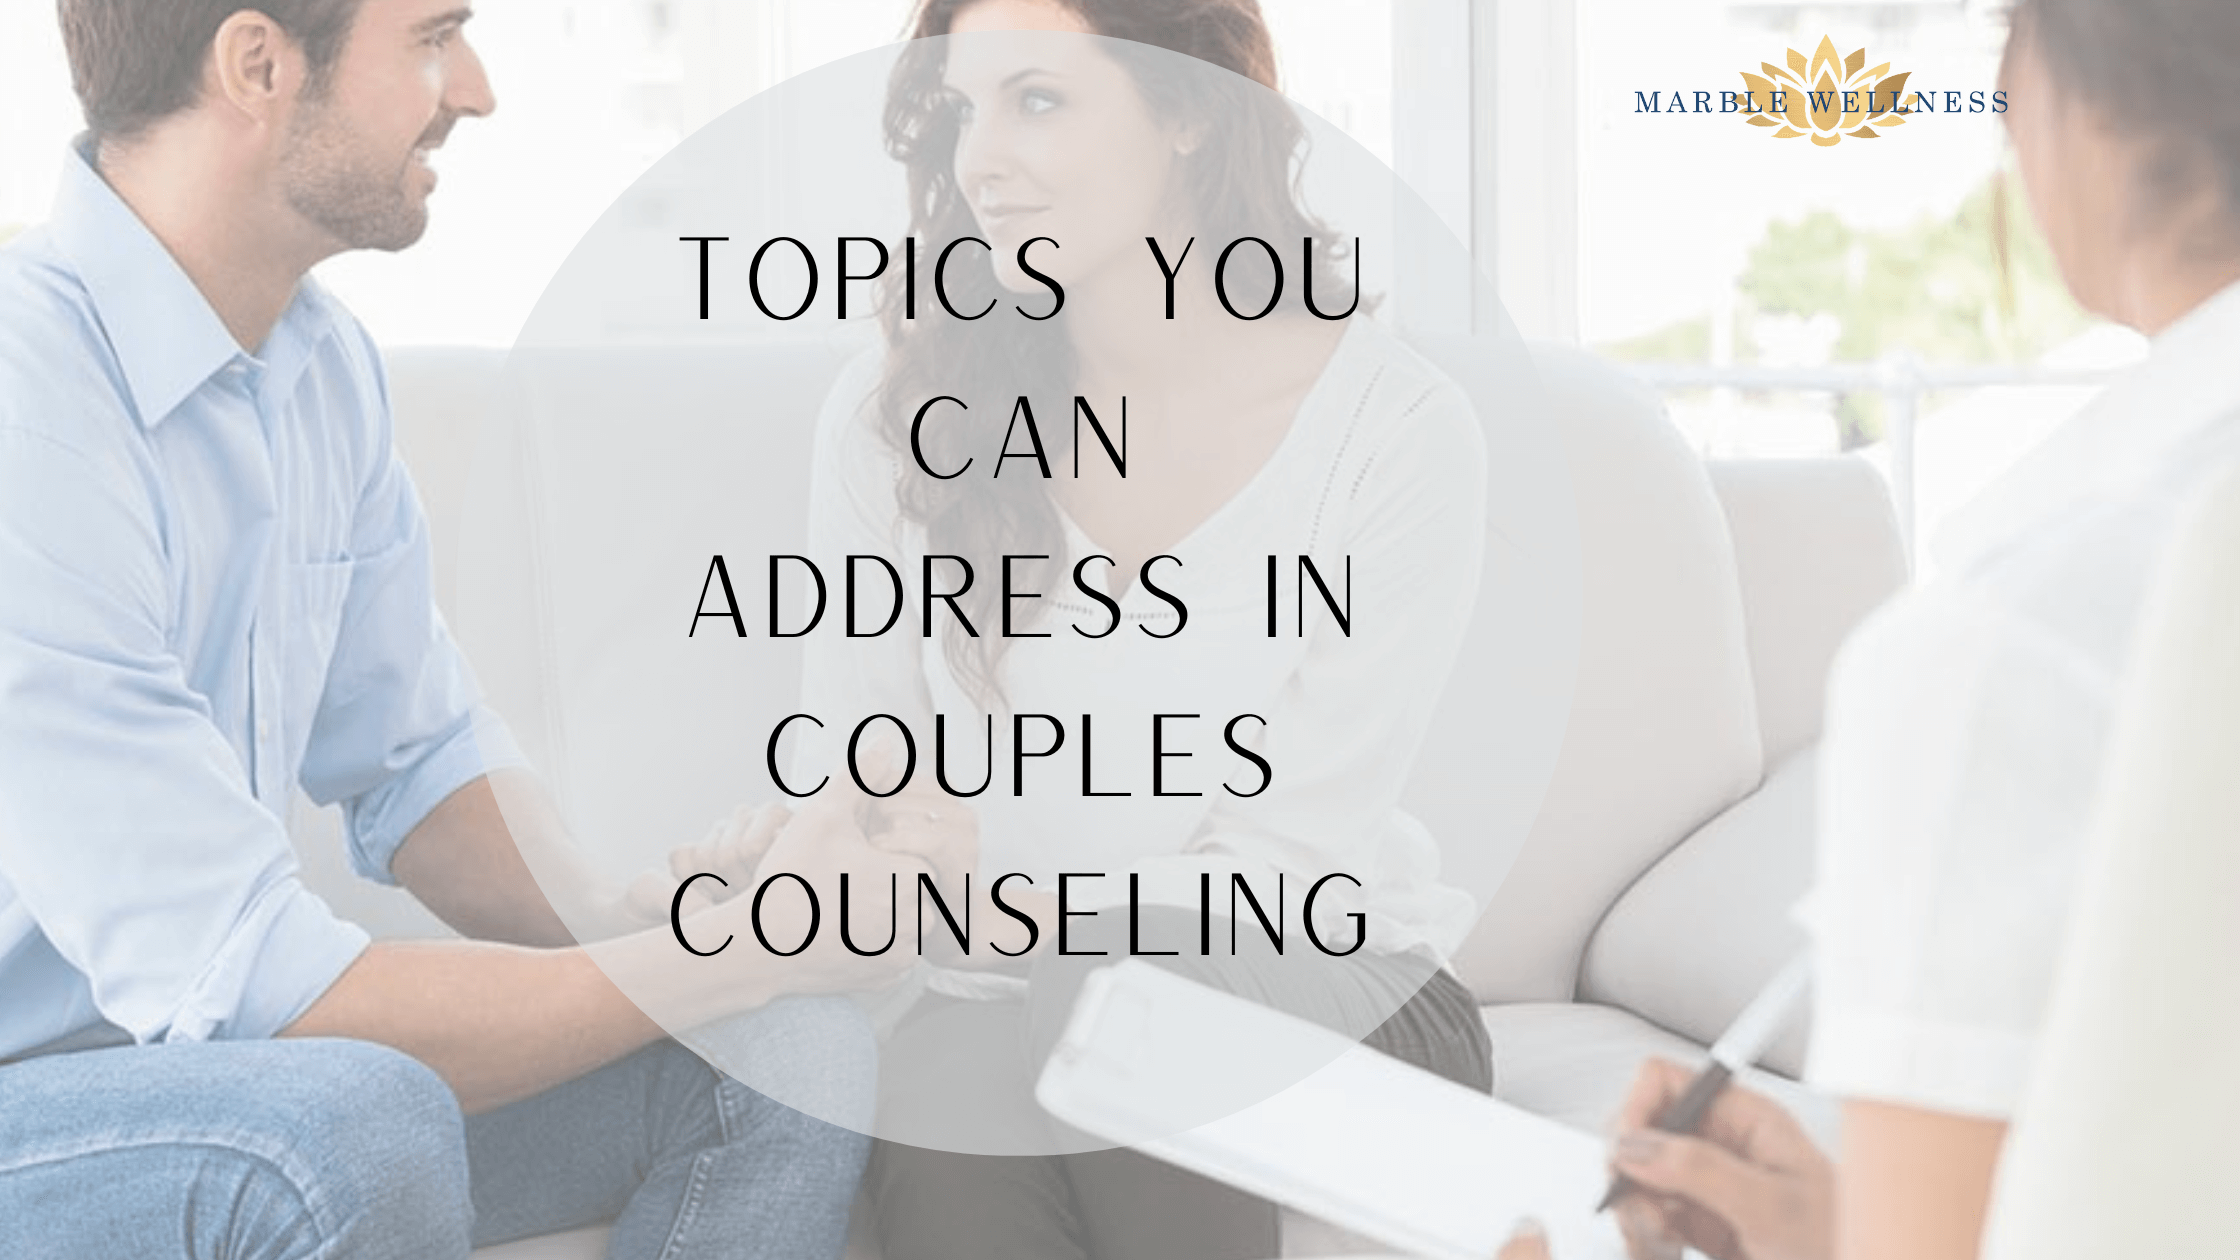 Cover art for "Topics You Can Address in Couples Counseling". Marble Wellness is located in West County, MO 63011 and specializes in couples counseling and much more.